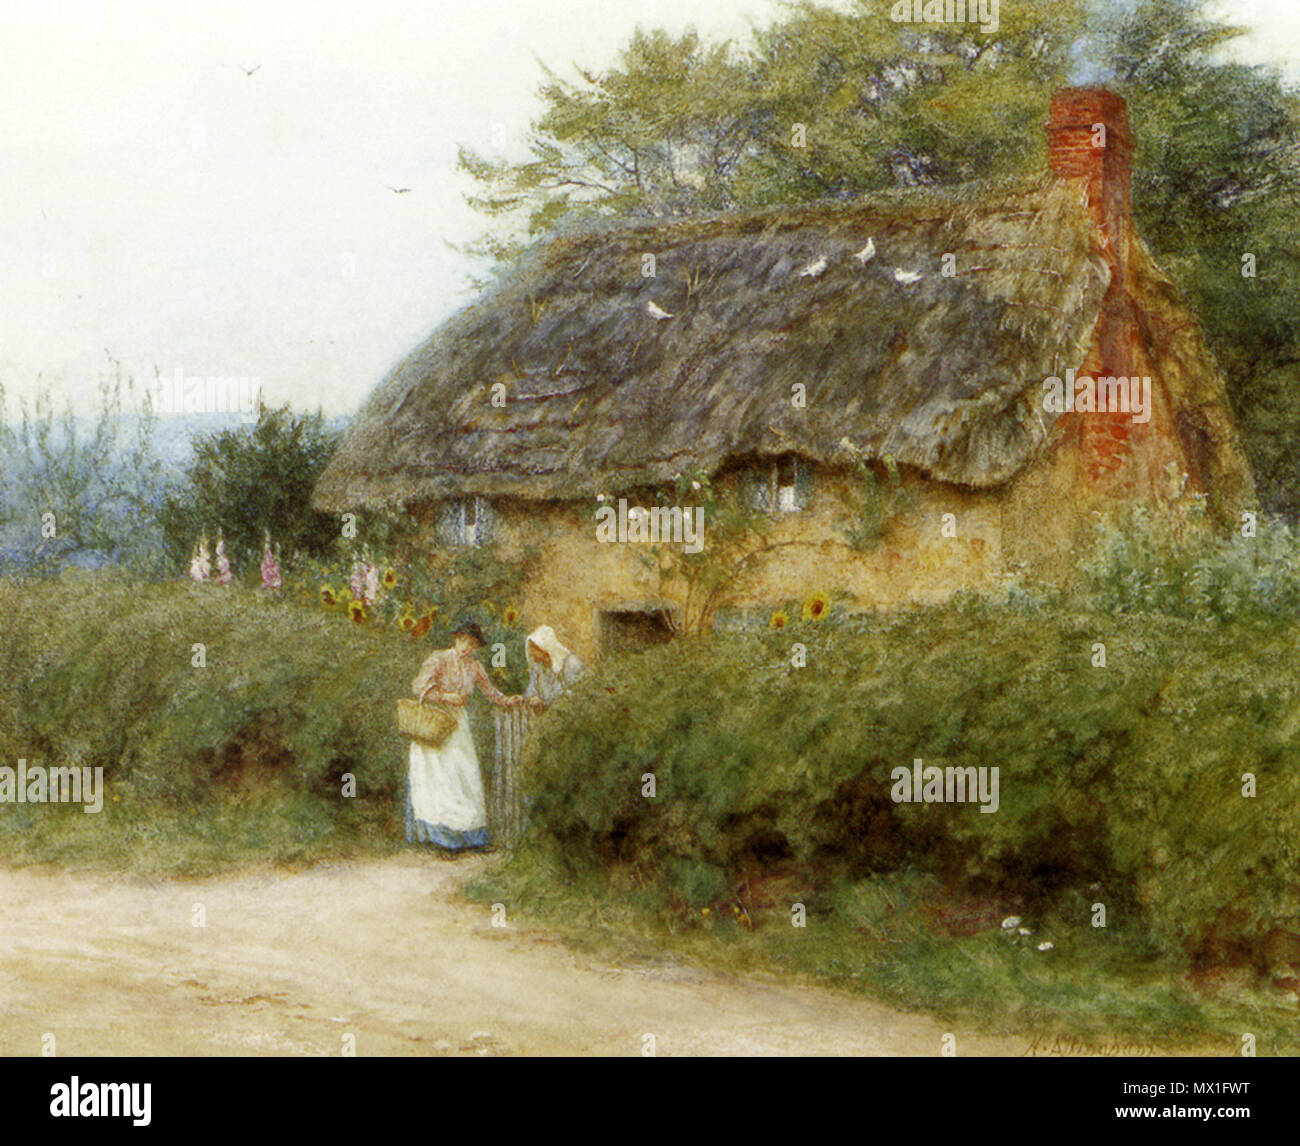 . Helen Allingham (26 September 1848 - 28 September 1926), was a well-known watercolour painter illustrator of the Victorian era. A Cottage With Sunflowers . 2008 (upload date).   Helen Allingham  (1848–1926)     Alternative names H. Paterson  Description British painter and illustrator  Date of birth/death 26 September 1848 28 September 1926  Location of birth/death Derbyshire Haslemere  Authority control  : Q444581 VIAF: 34727518 ISNI: 0000 0000 8371 5642 ULAN: 500003736 LCCN: n50021031 GND: 119120836 WorldCat 39 Allingham Helen A Cottage With Sunflowers At Peaslake Stock Photo